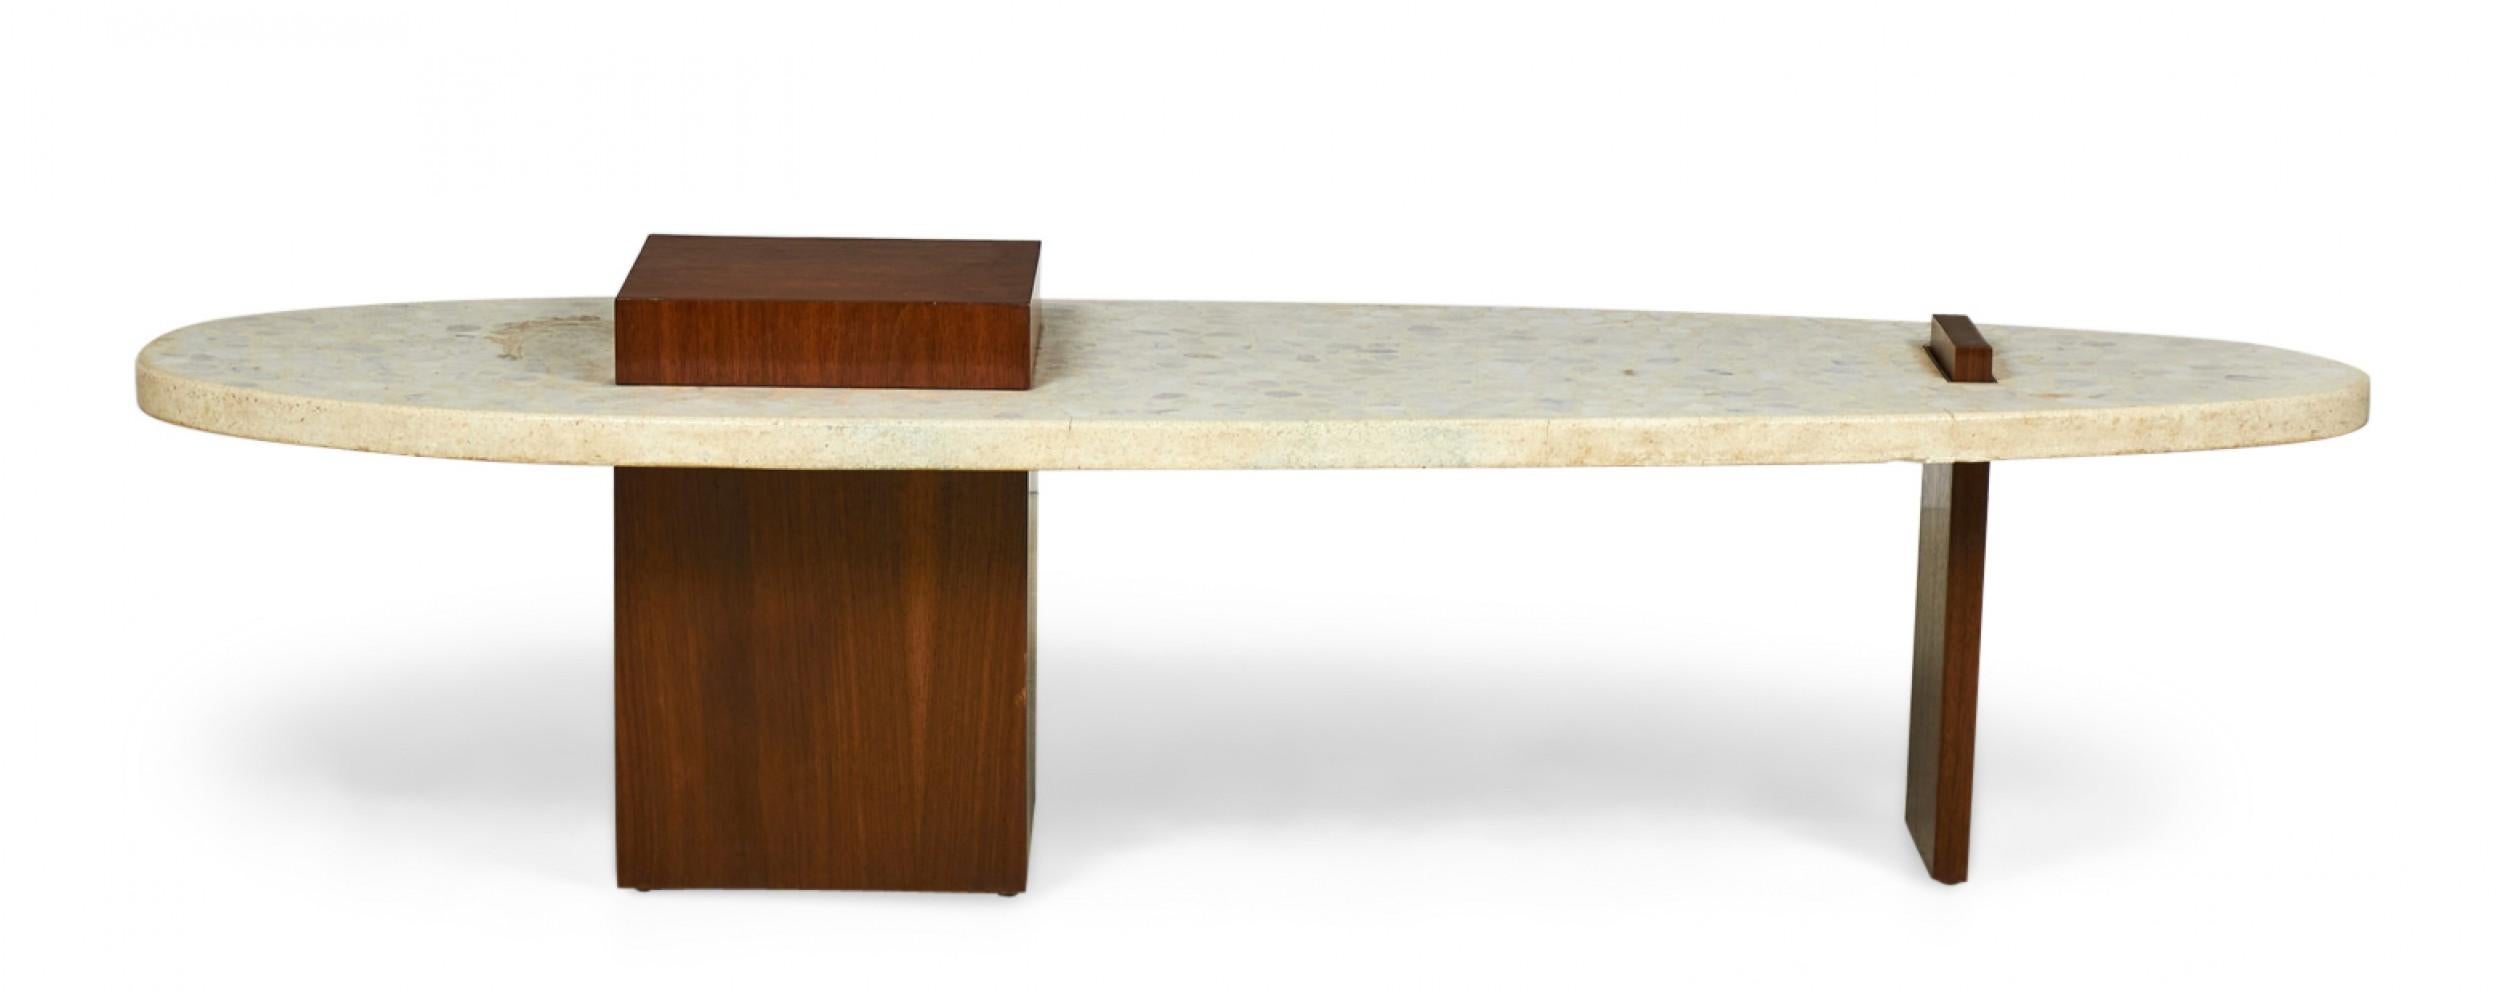 Terrazzo and Walnut Surfboard-Form Coffee Table 'Manner of Harvey Probber' For Sale 1